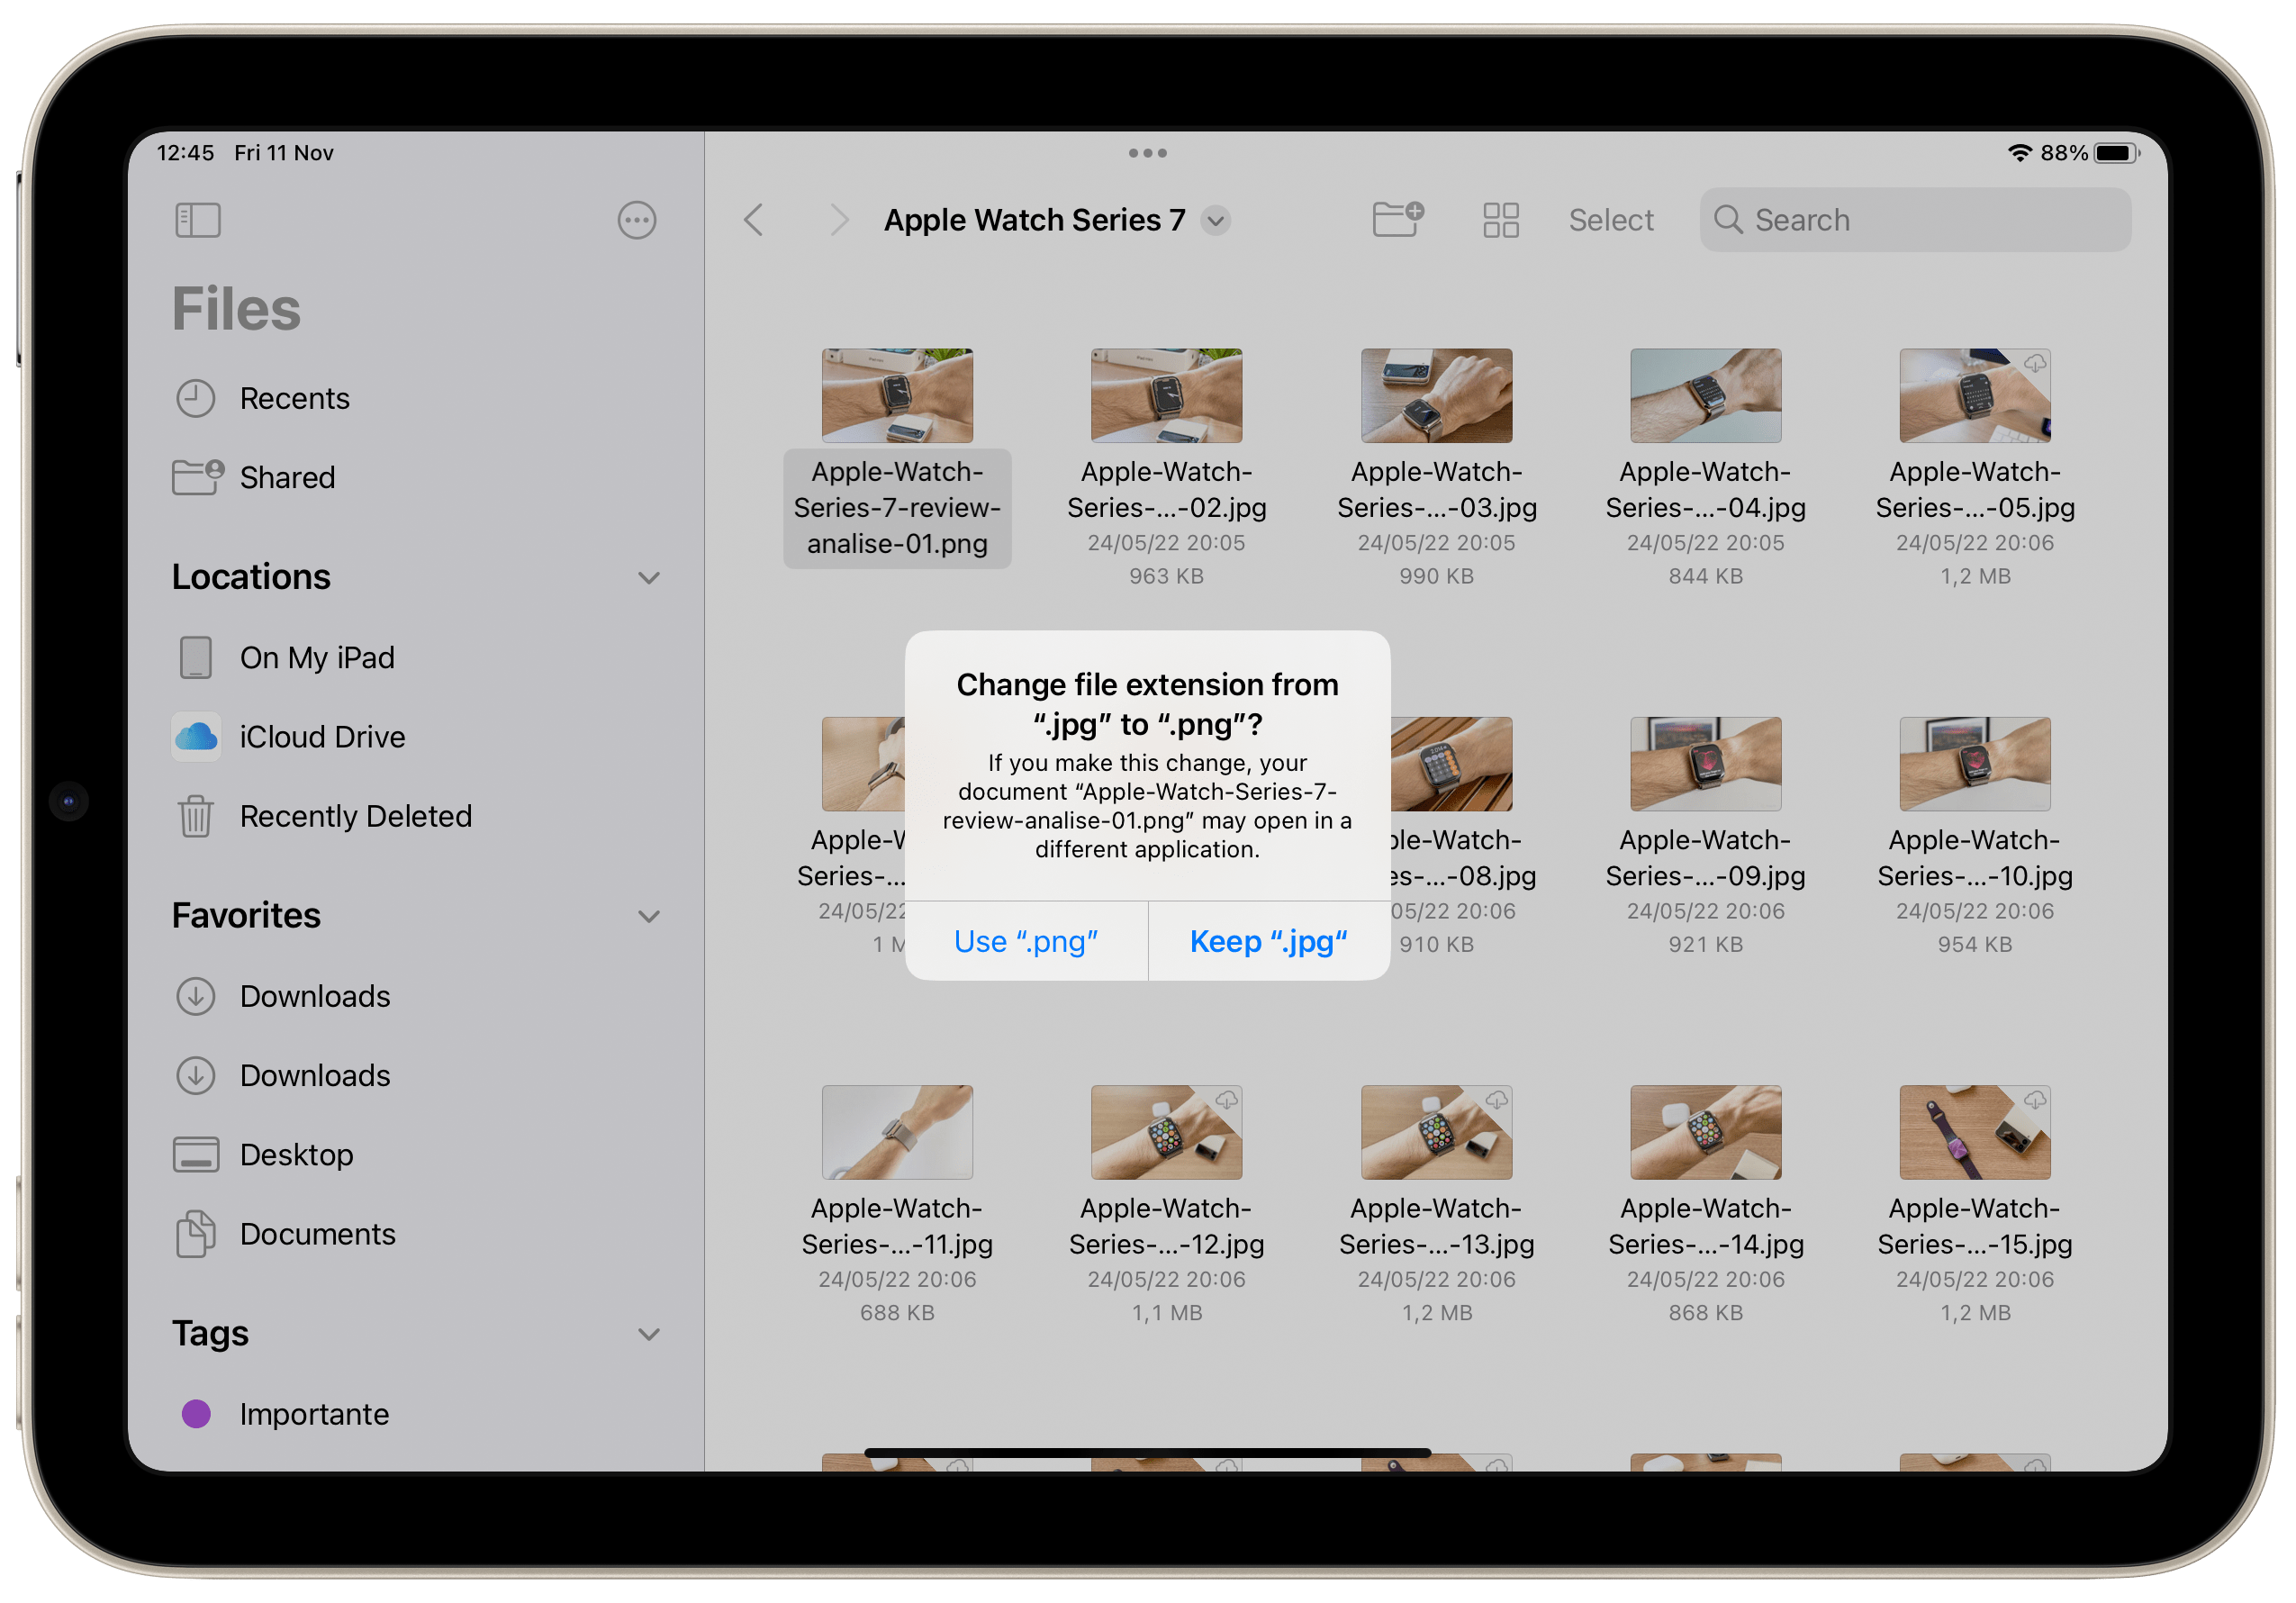 How to use the new features of the Files app in iPadOS 16